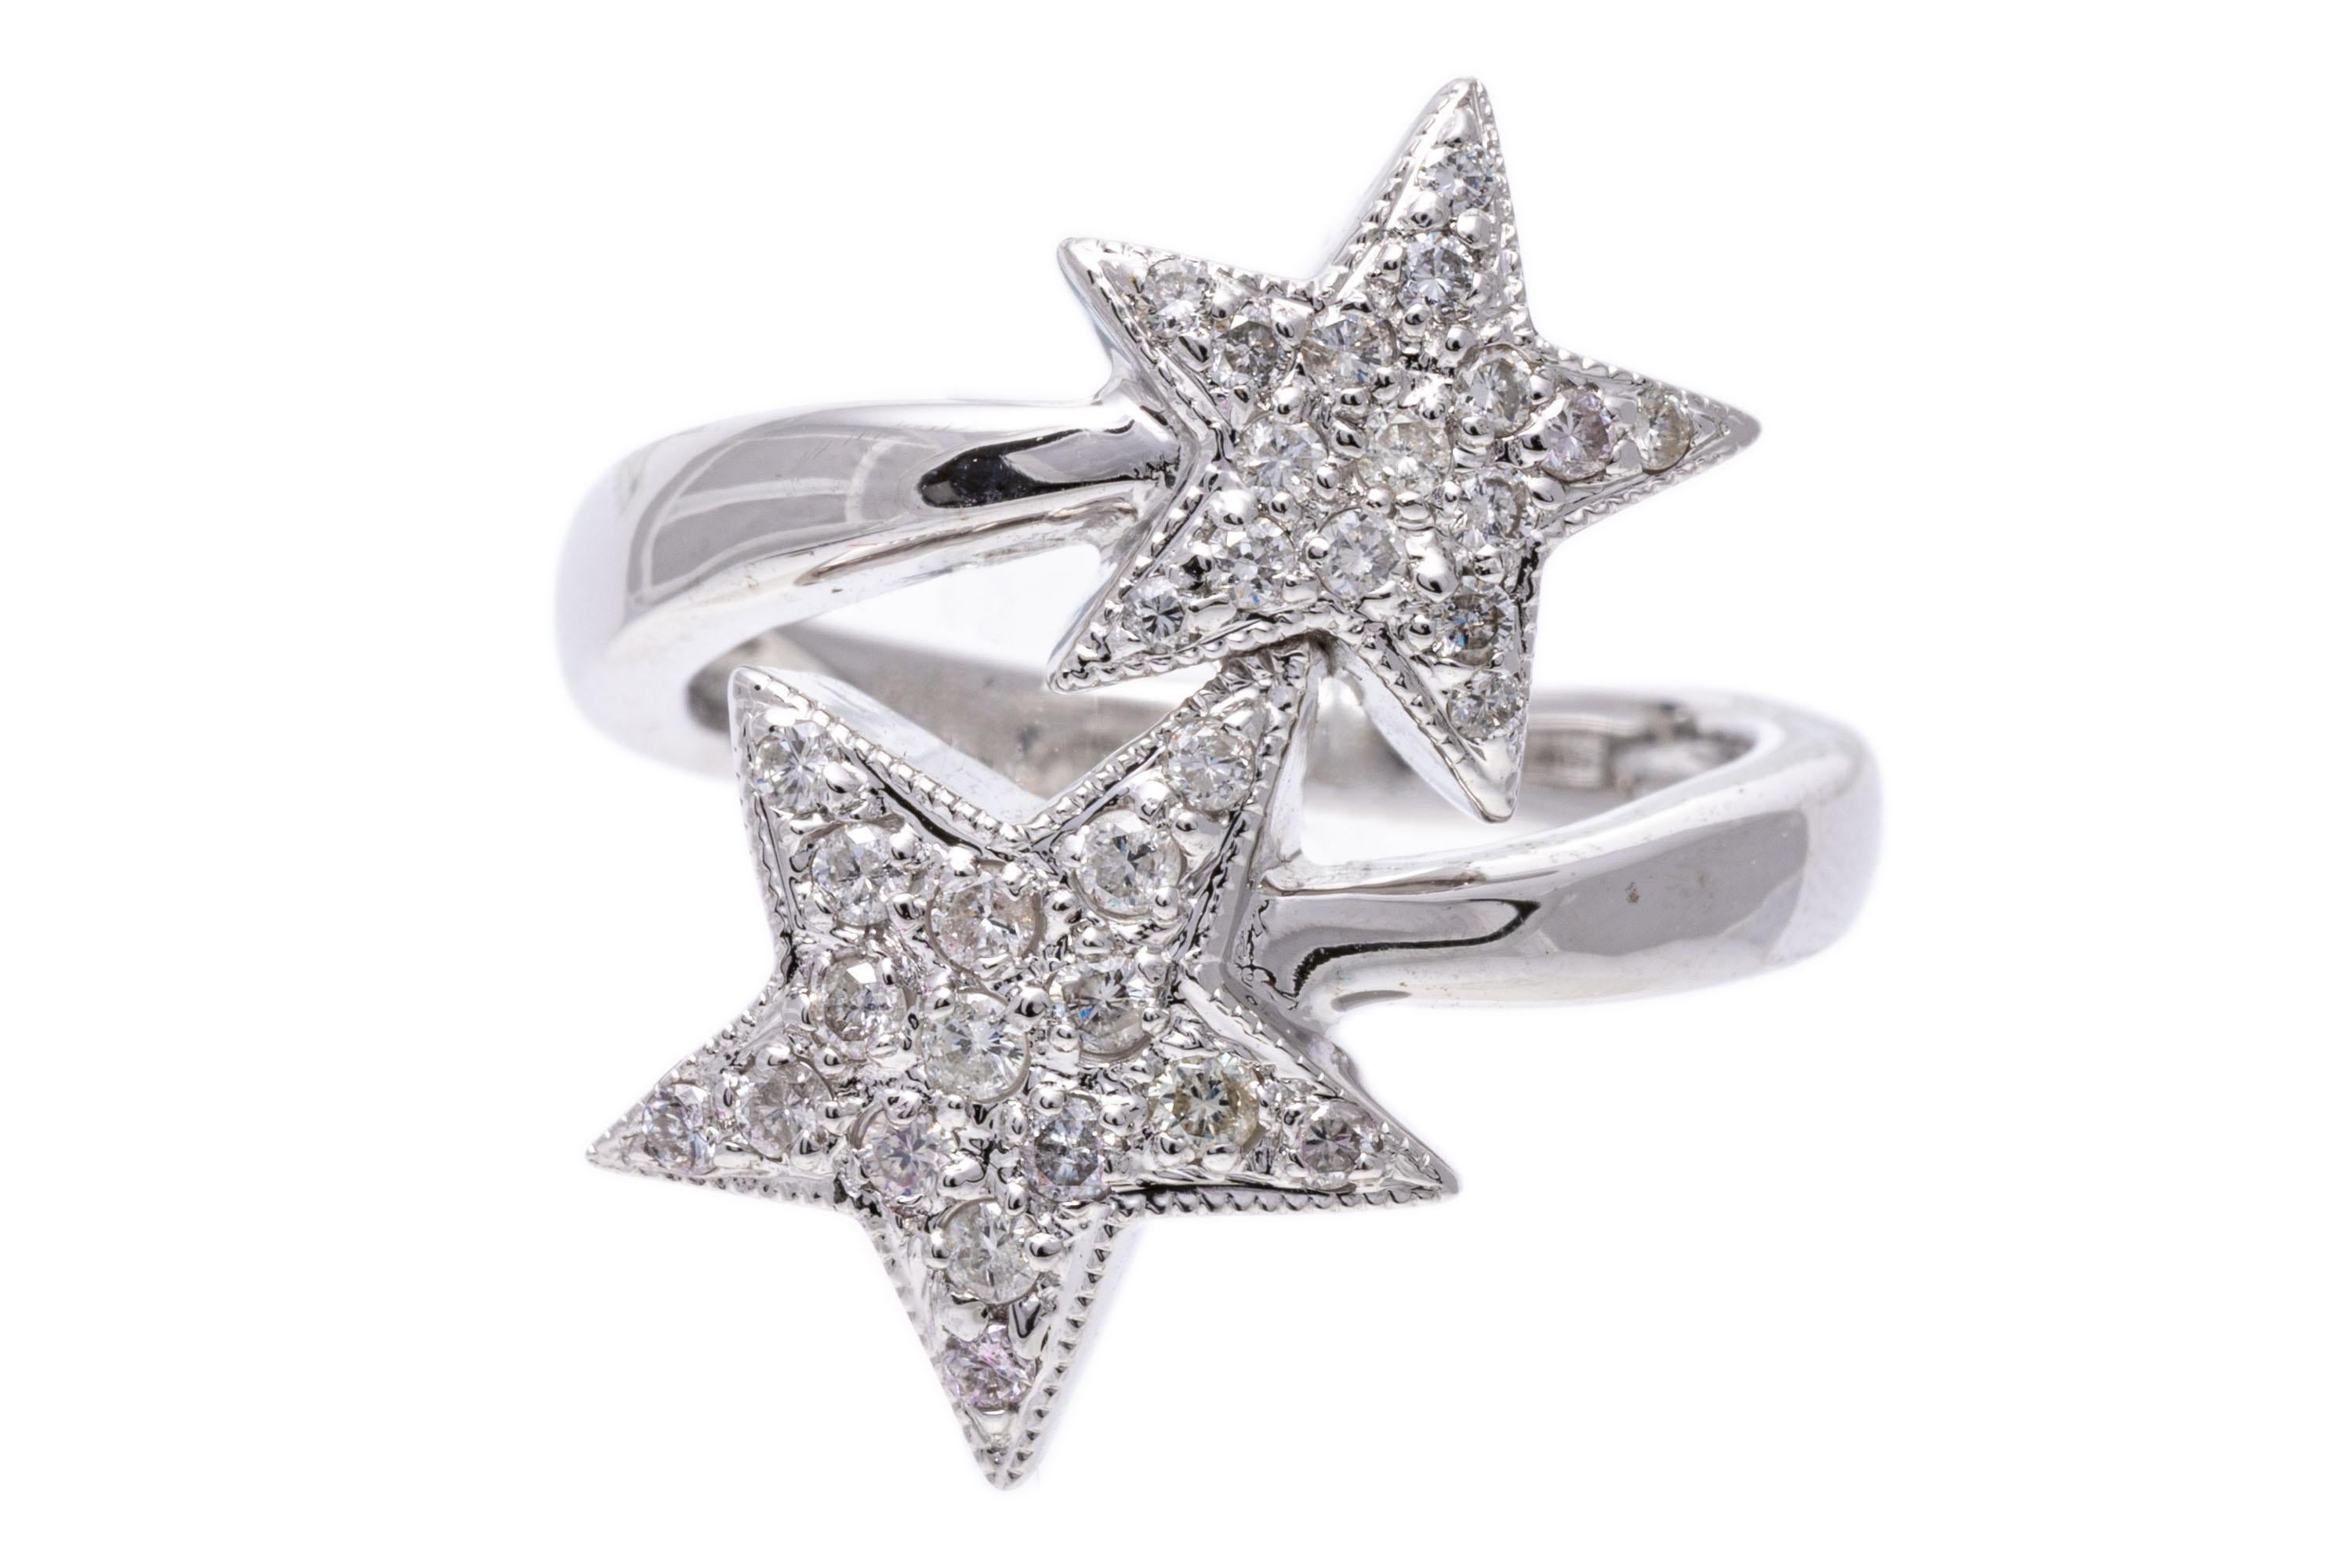 18k white gold ring. This playful ring is a bypass, crossover style, adorned with two complementary offset stars, decorated with round faceted diamonds, approximately 0.29 TCW, pave set and finished with a high polished shank.
Marks: 750
Dimensions: